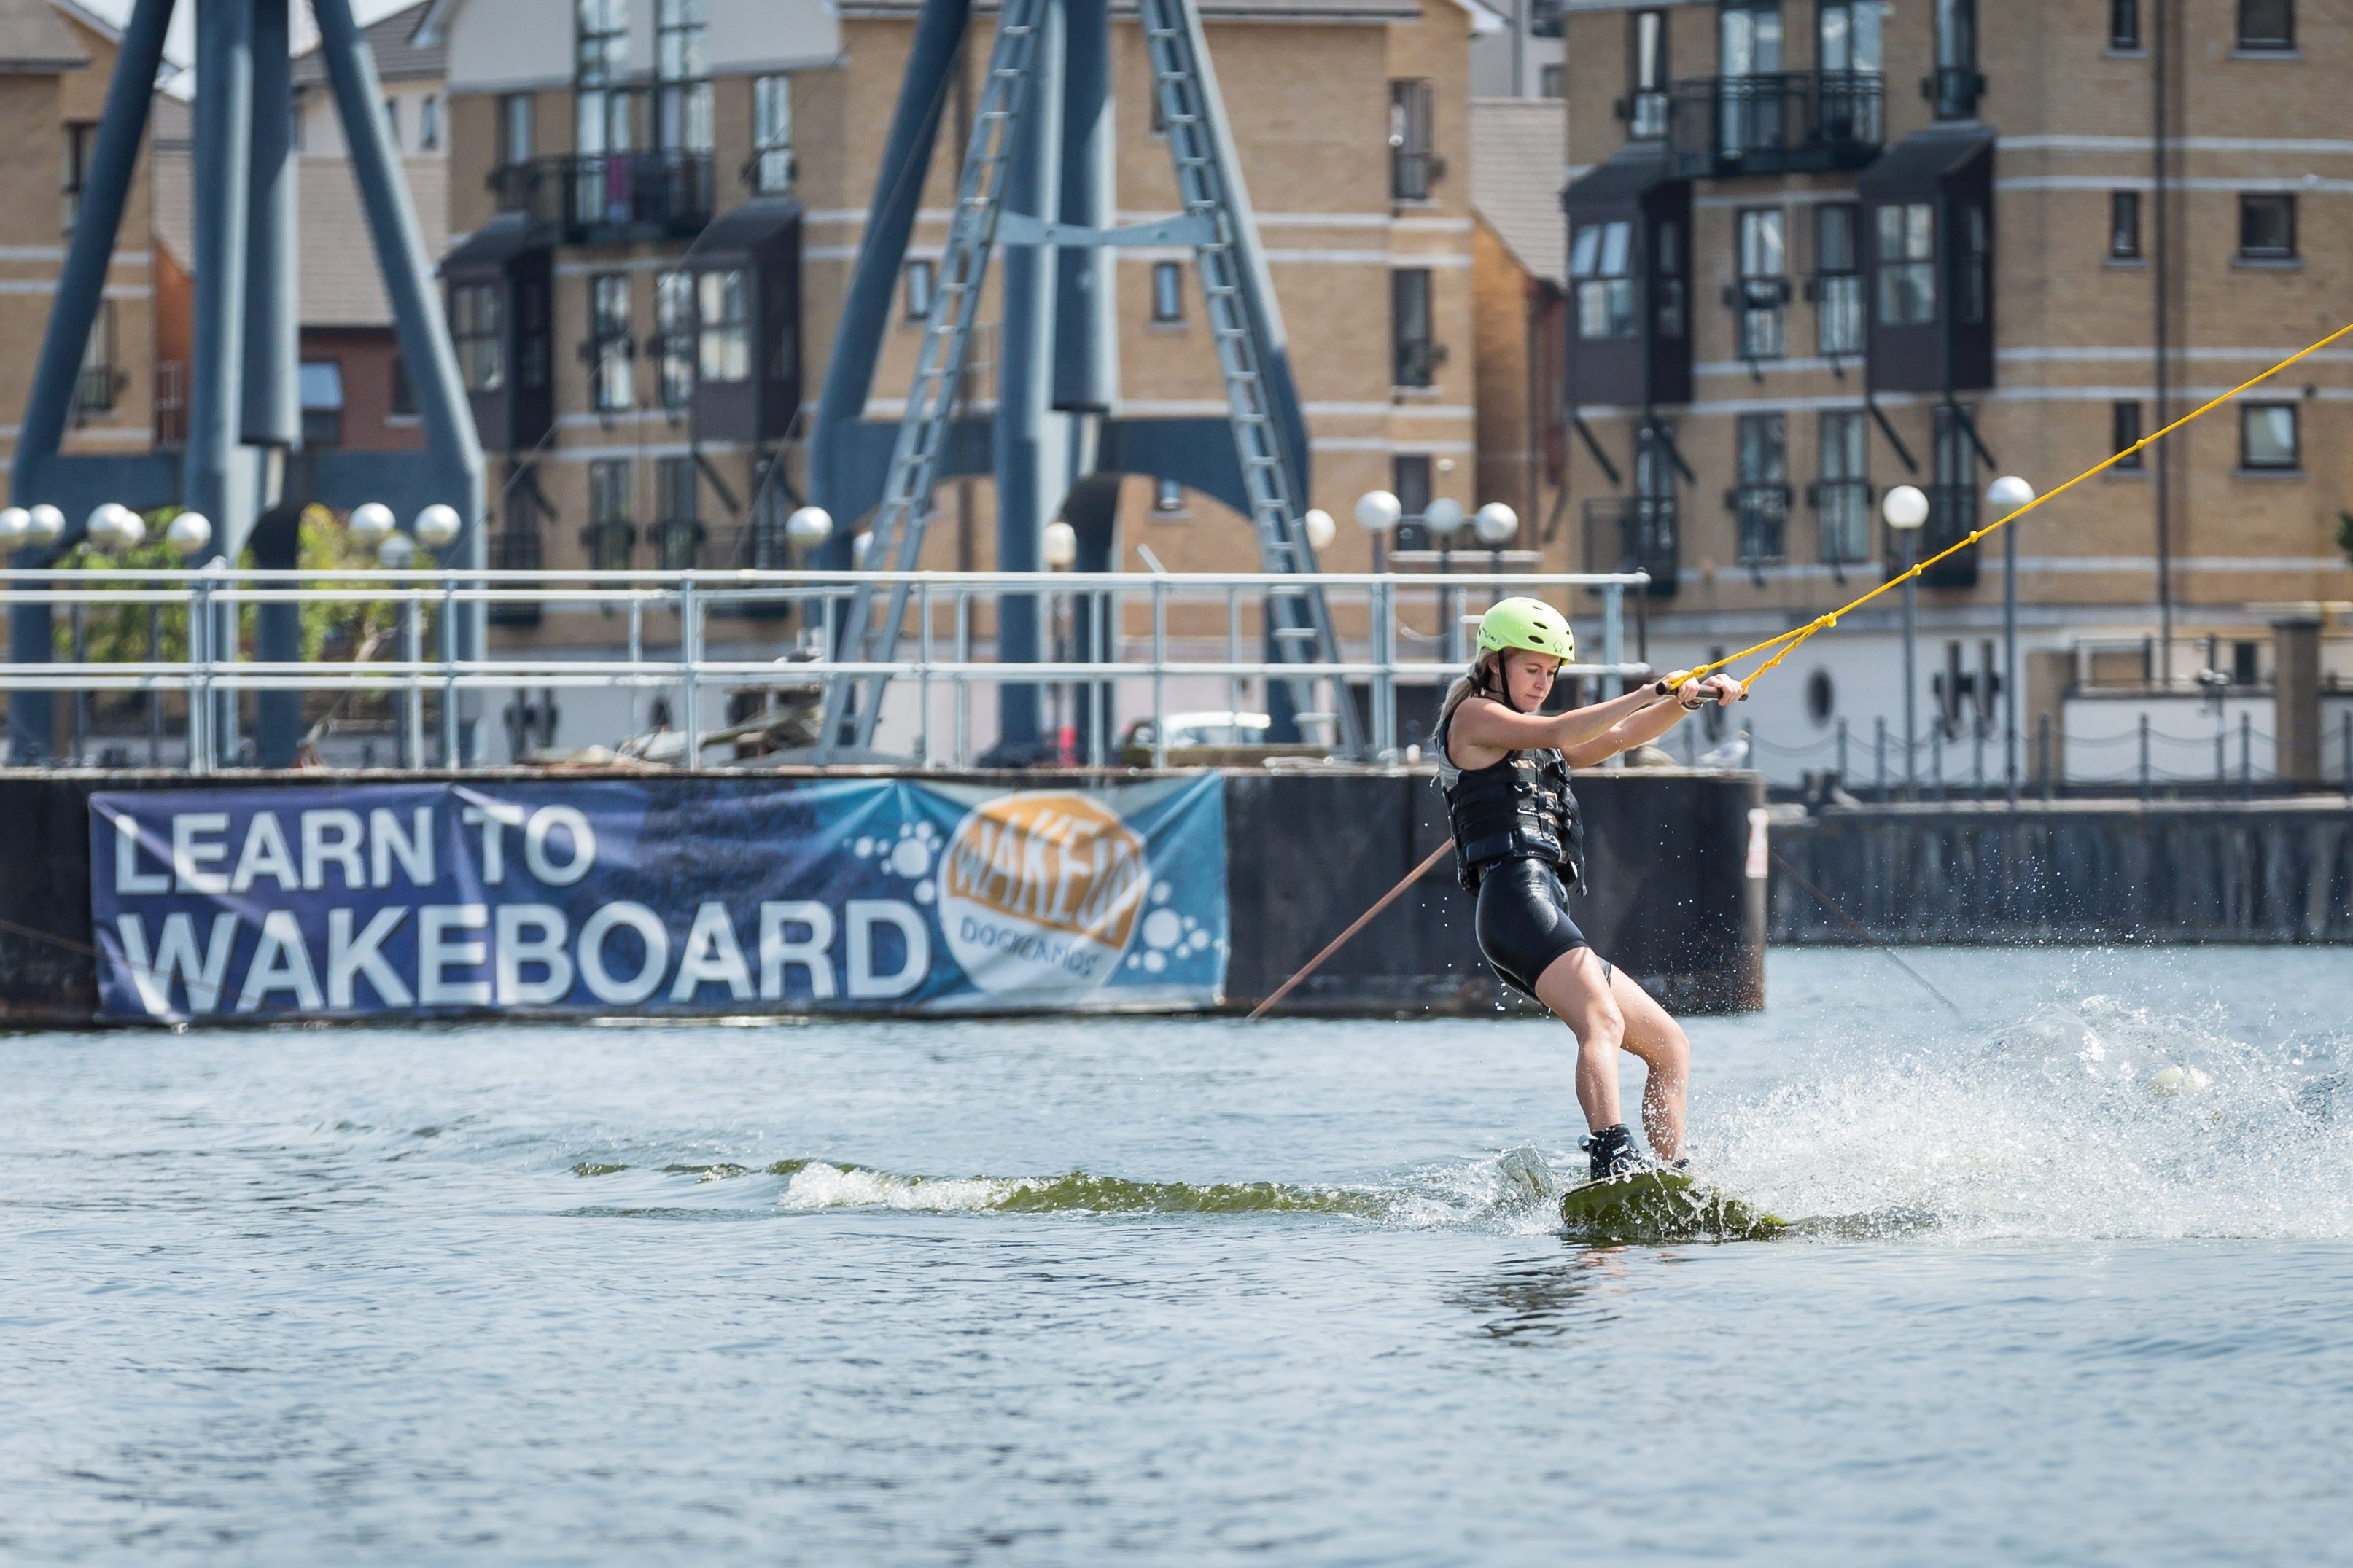 A beginner wakeboarding at the Royal Docks